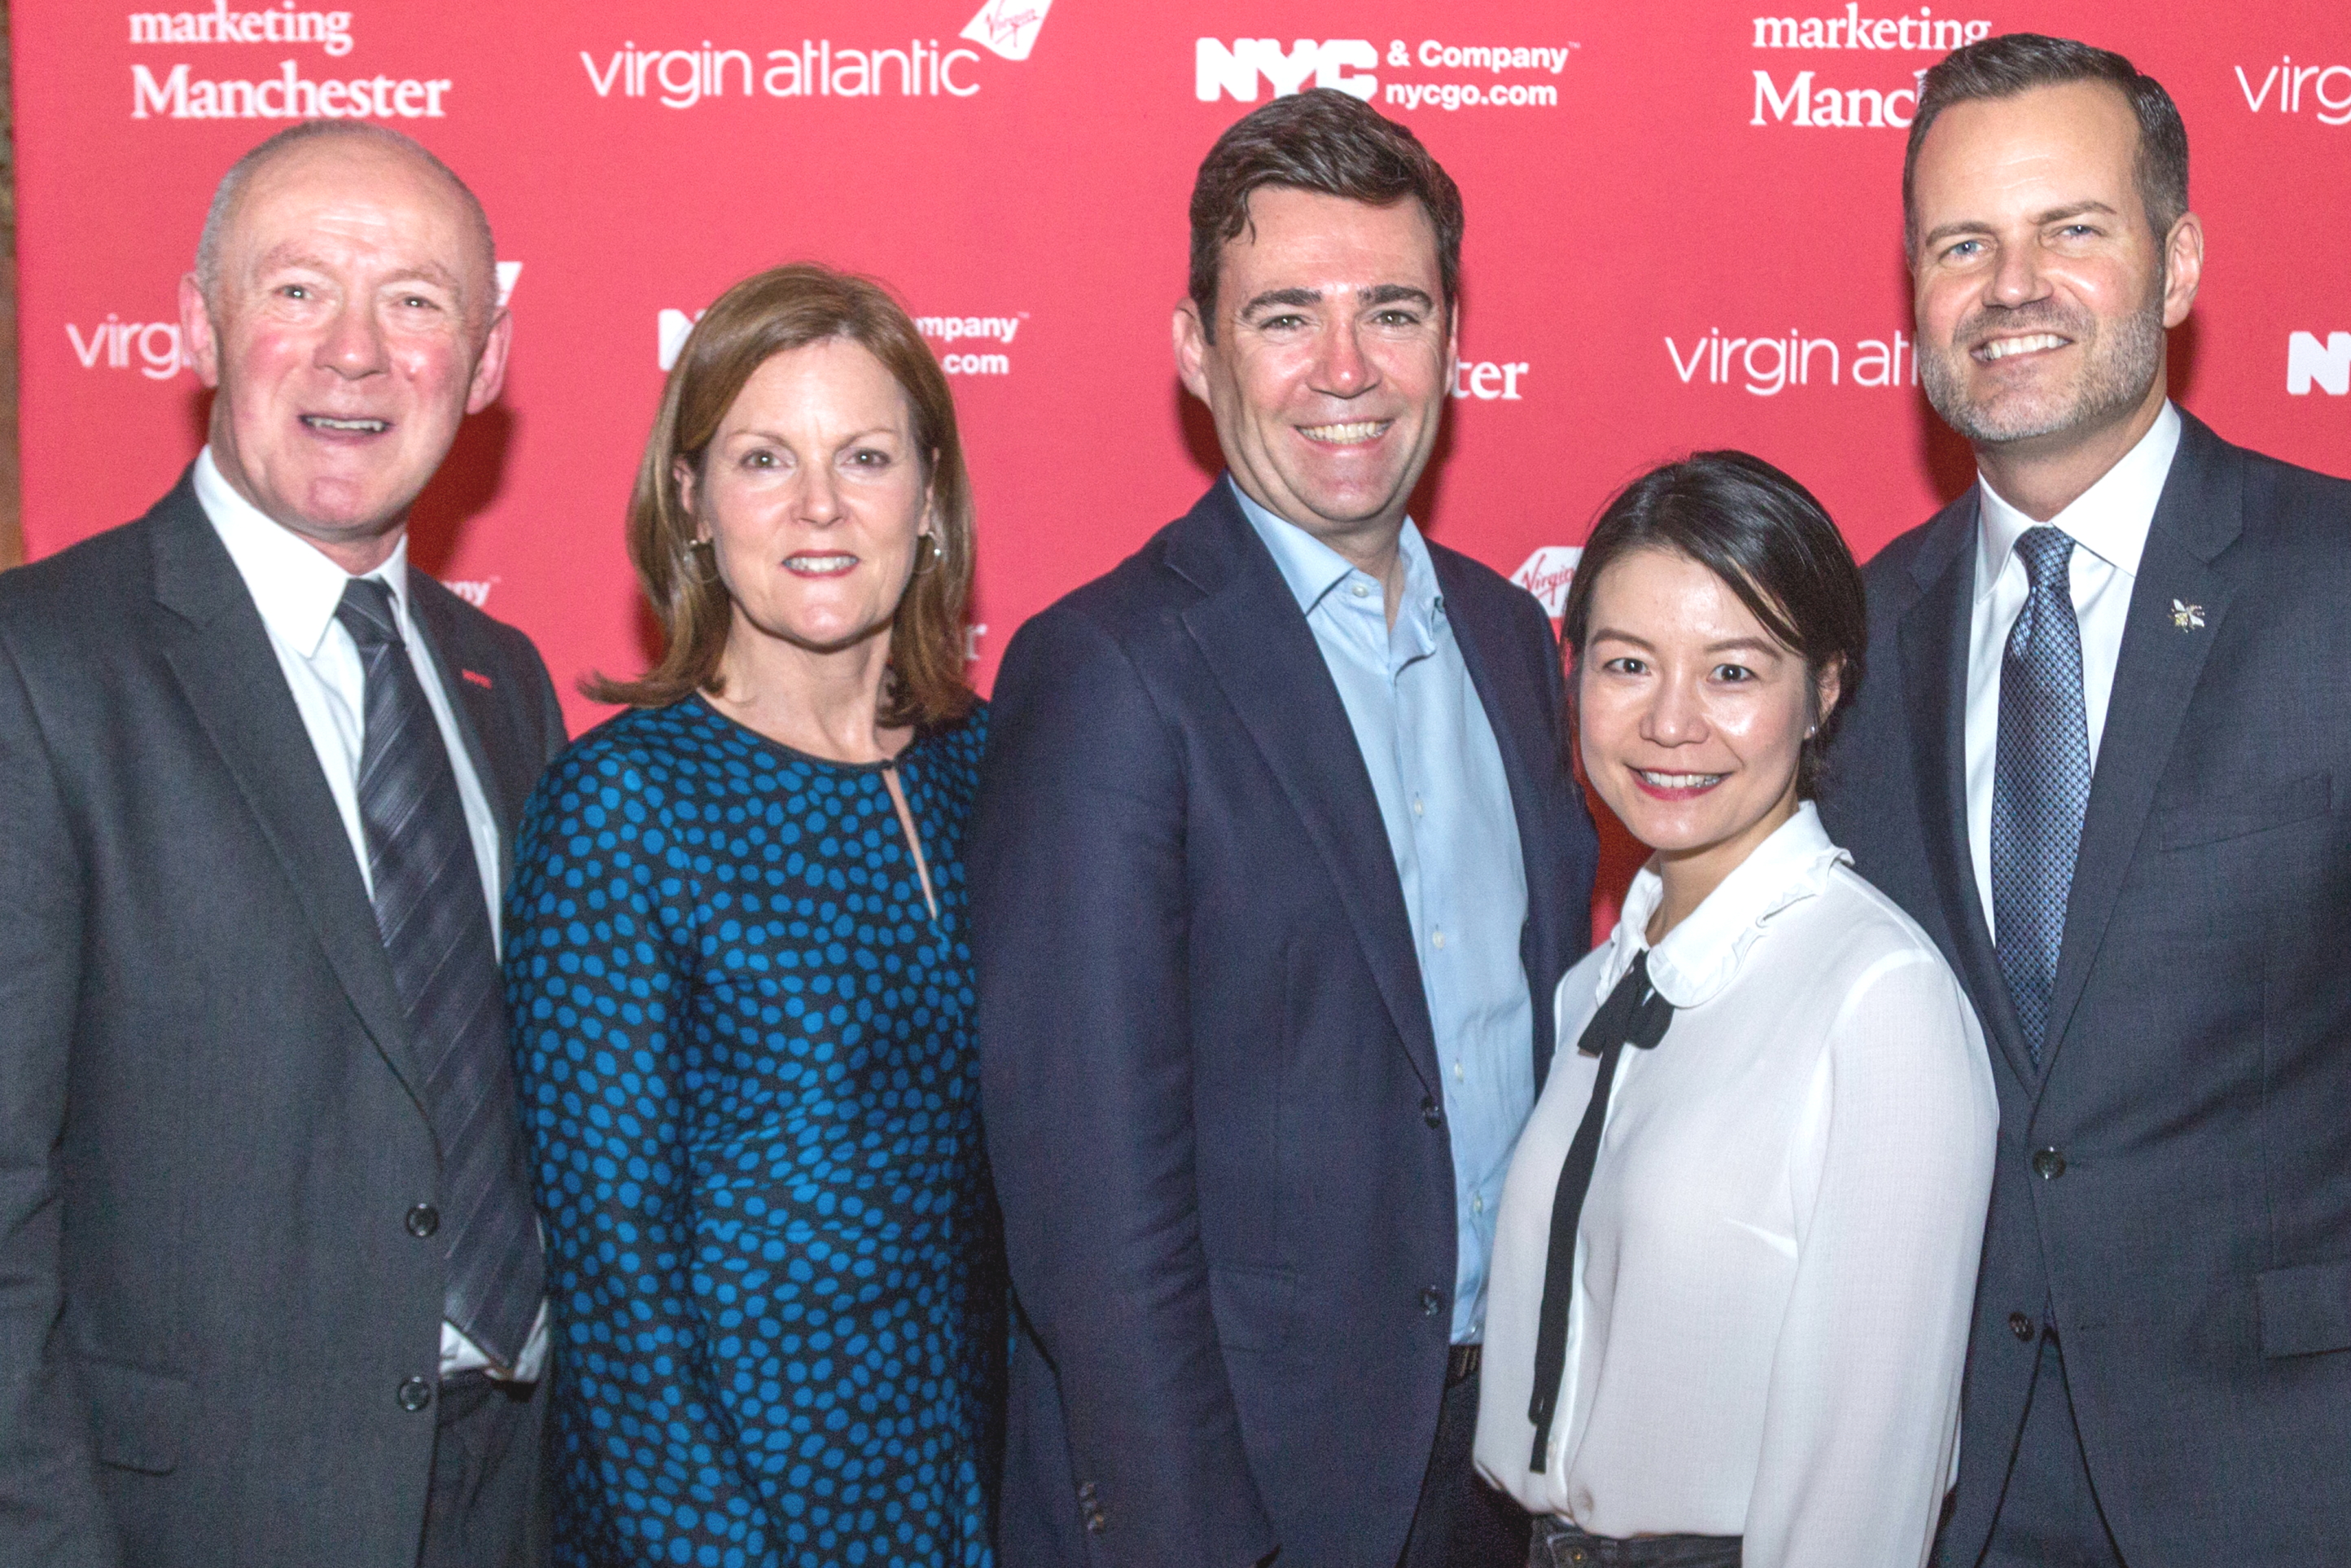 L-R: Sir Richard Leese (Leader, Manchester City Council), Sheona Southern (Managing Director, Marketing Manchester), Andy Burnham (Mayor, Greater Manchester), Hai Bei Chen (Head of Brand Strategy and Campaigns, Virgin Atlantic), Fred Dixon (President and CEO, NYC & Company). Click to enlarge.